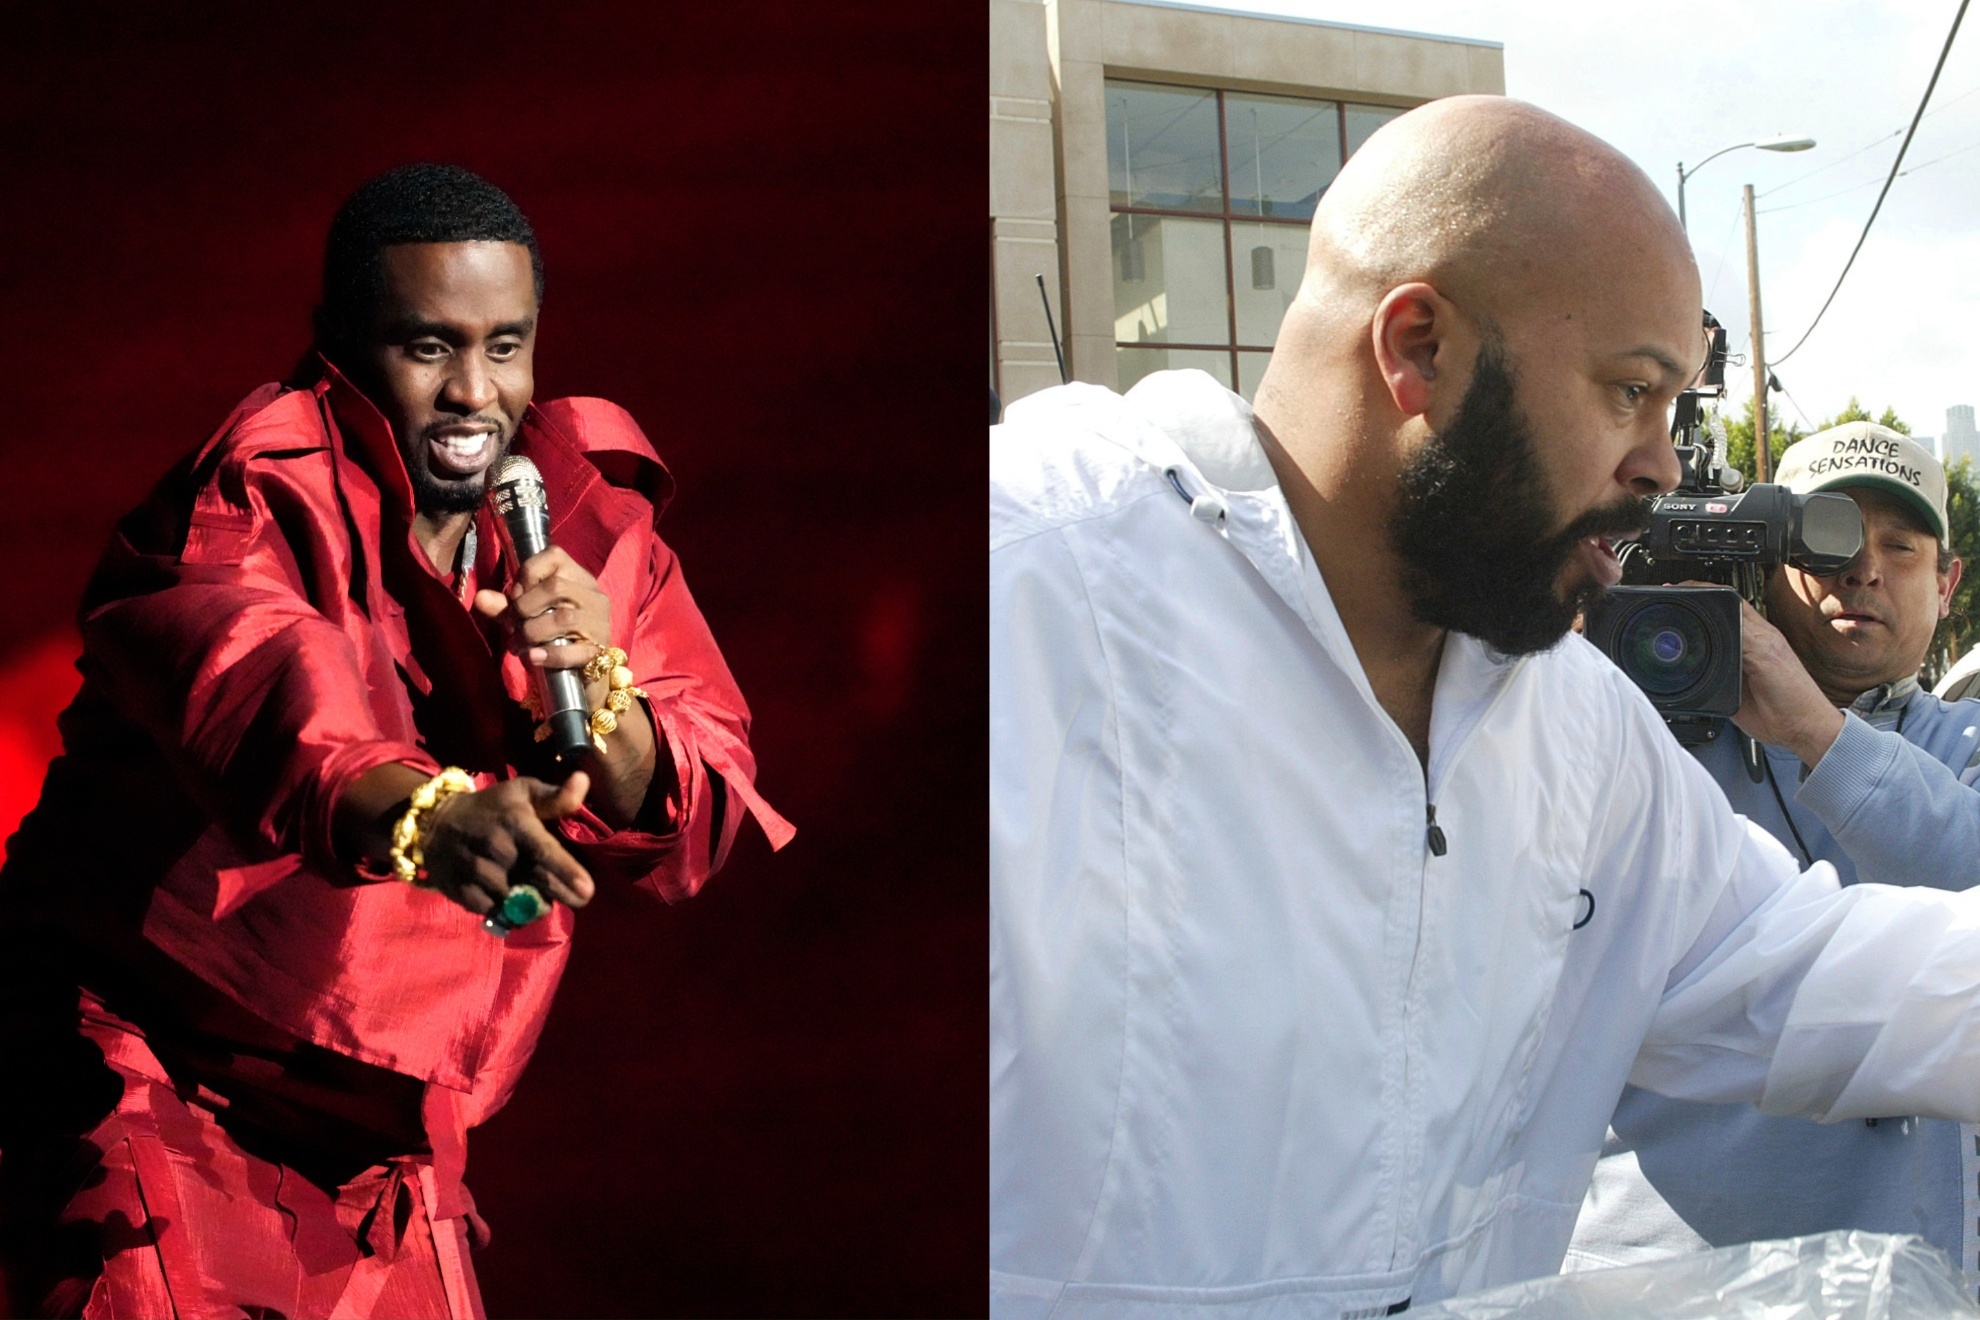 Mashup image of Diddy and Suge Knight